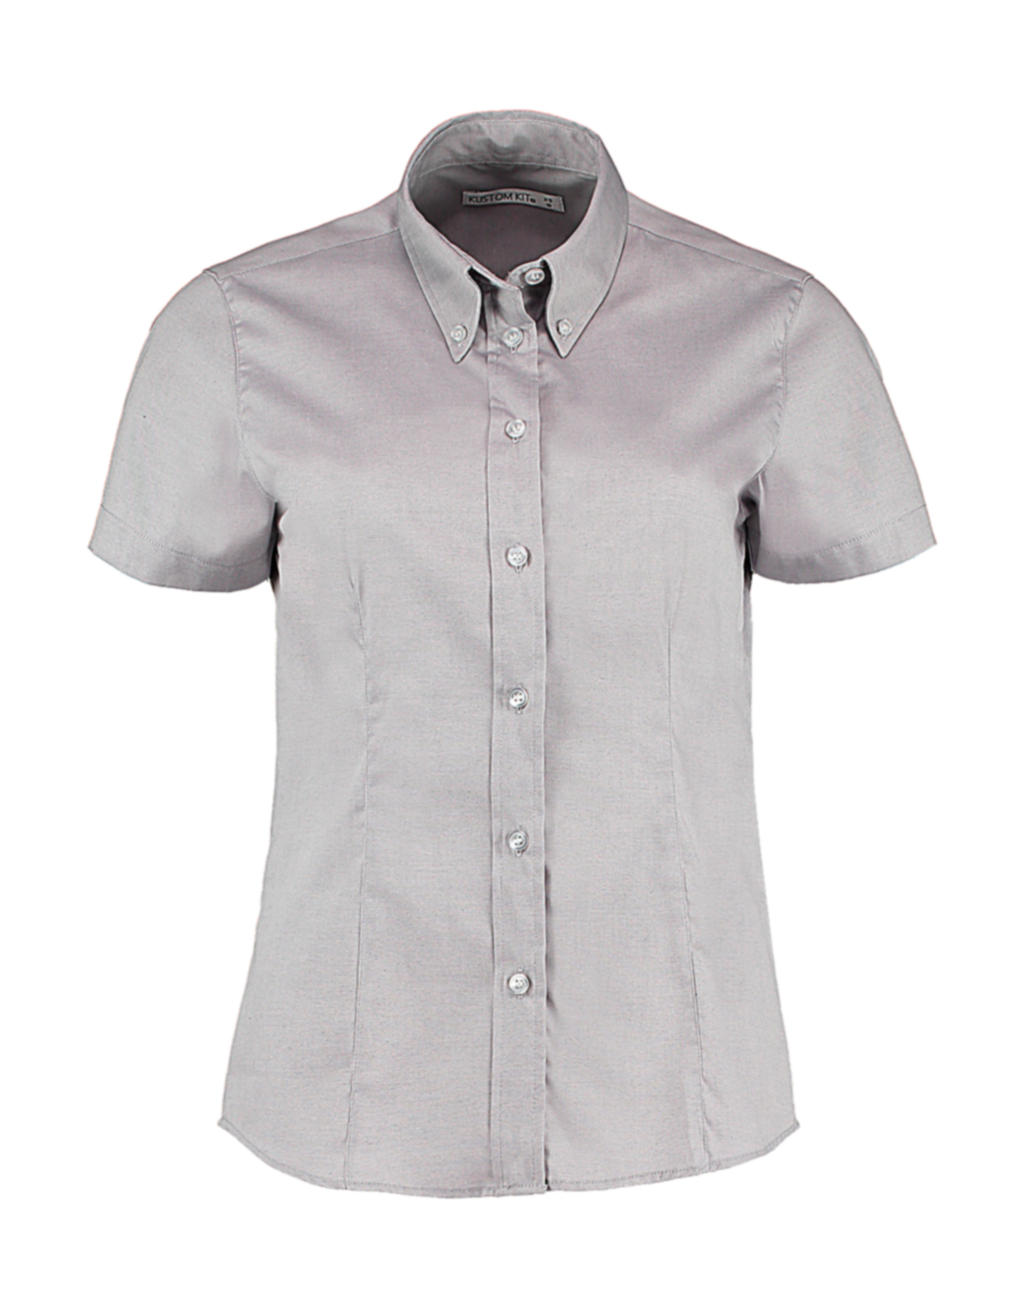  Womens Tailored Fit Premium Oxford Shirt SSL in Farbe Silver Grey